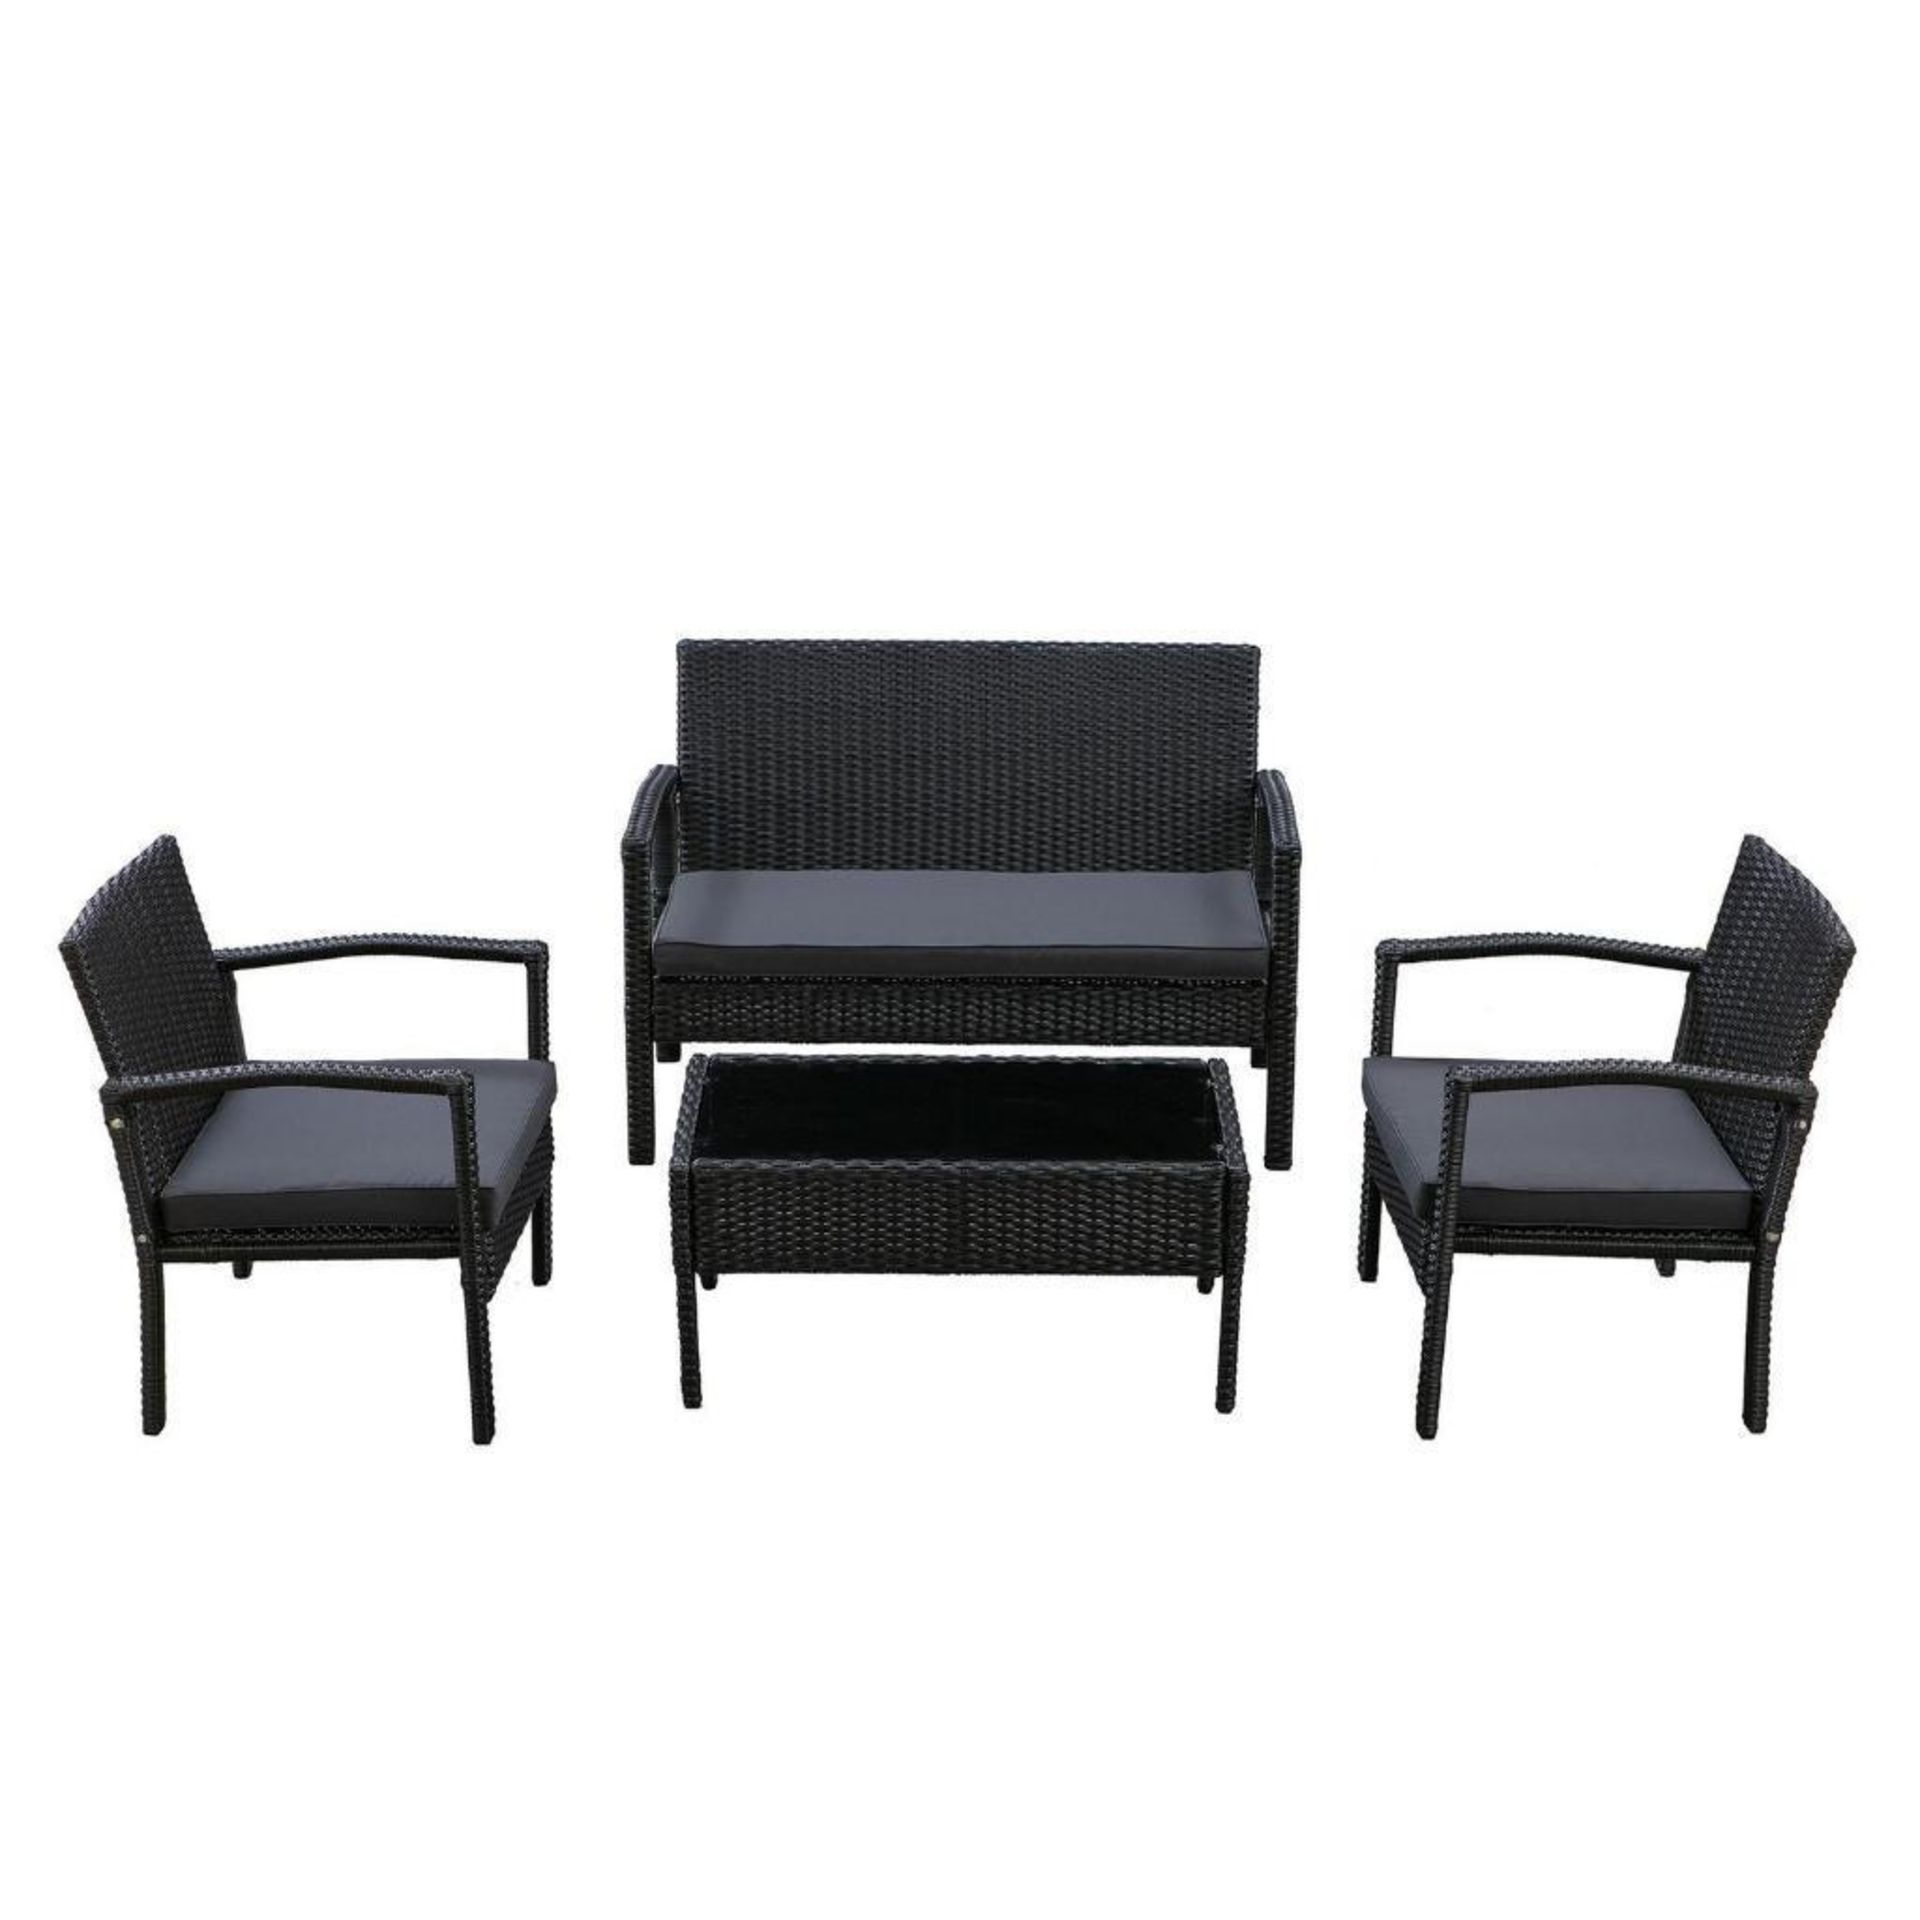 Patioflare Ivan 4Pc Conversation Patio Set- Black-NEW IN BOX. - Image 4 of 4